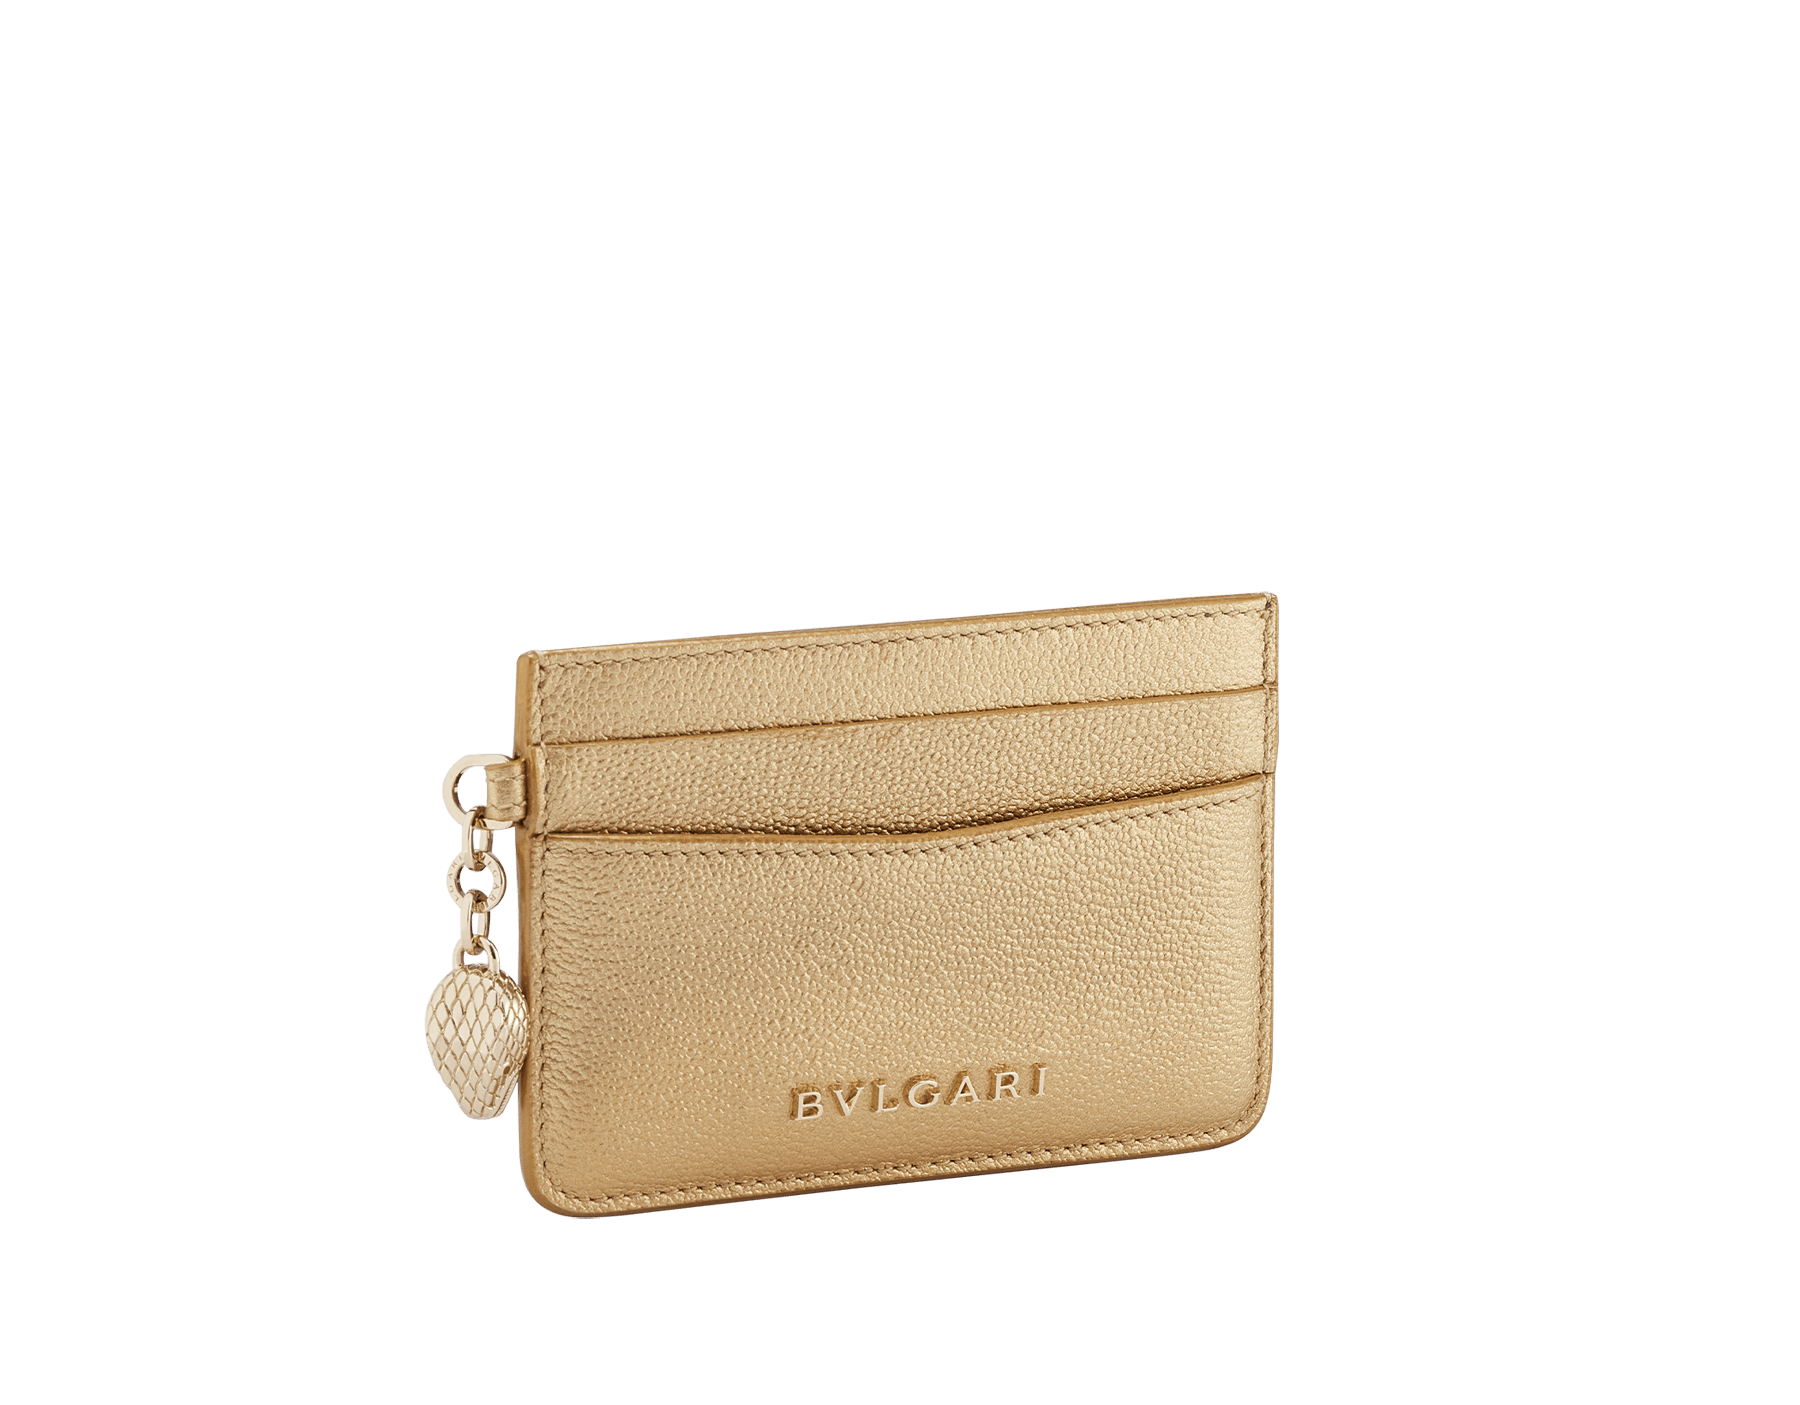 Credit card holder in ruby red and desert quartz calf leather. Serpenti charm in black and white enamel with green malachite enamel eyes and Bulgari logo in metal characters. SEA-CC-HOLDER-CLa image 1